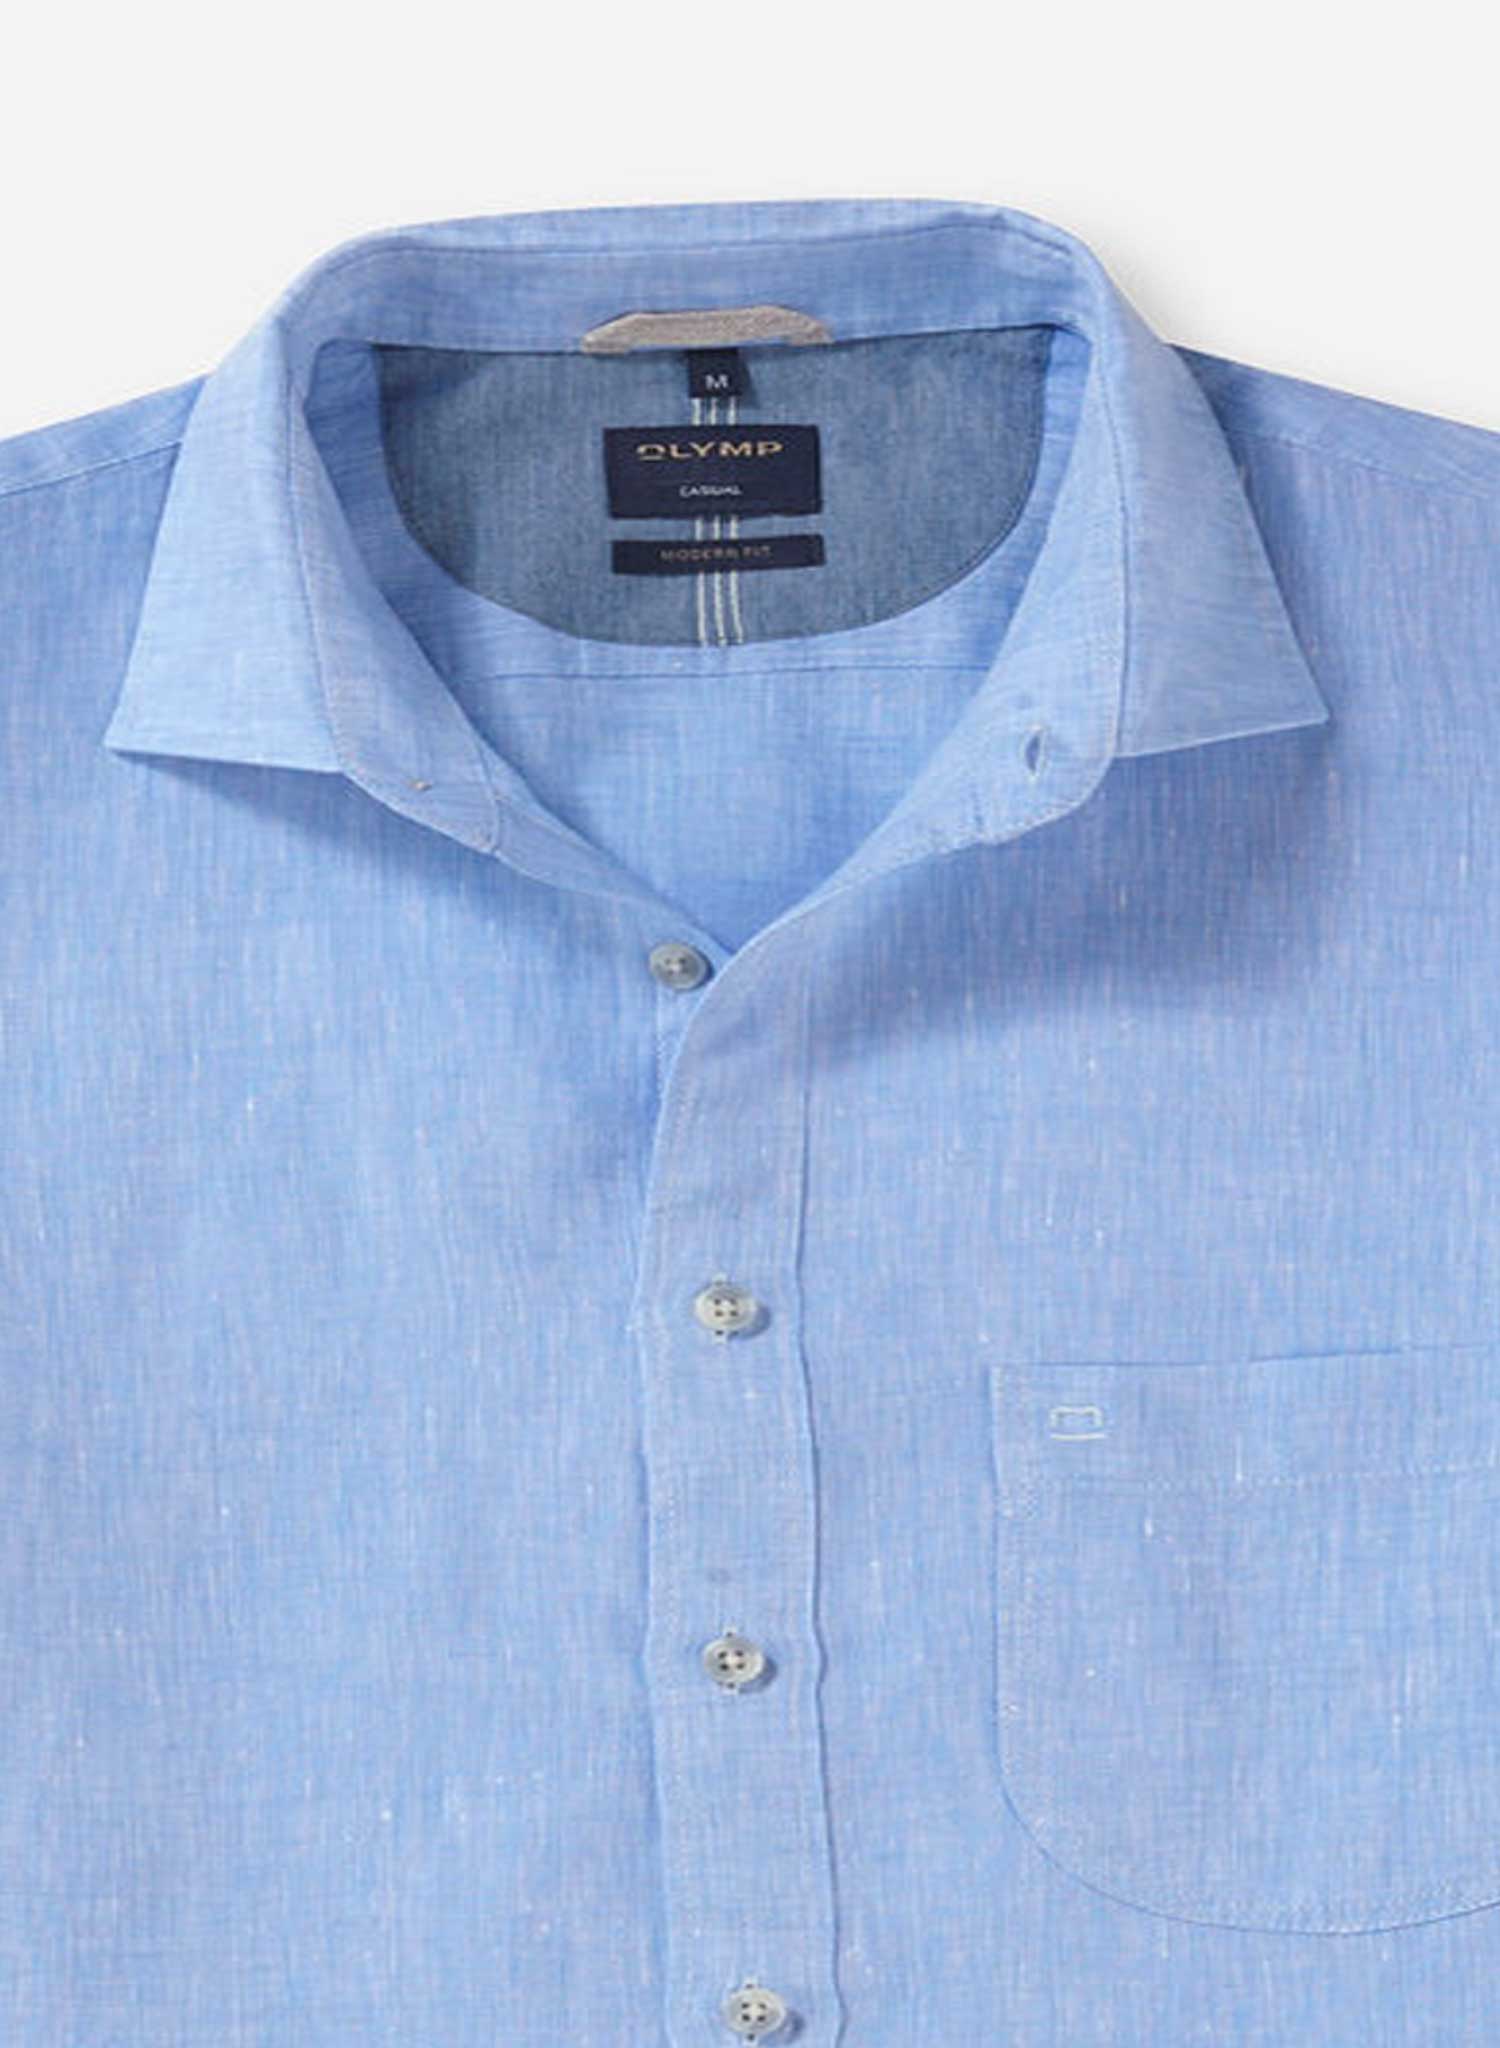 Olymp Short Sleeve Linen Shirt Blue Front Cropped to show Collar